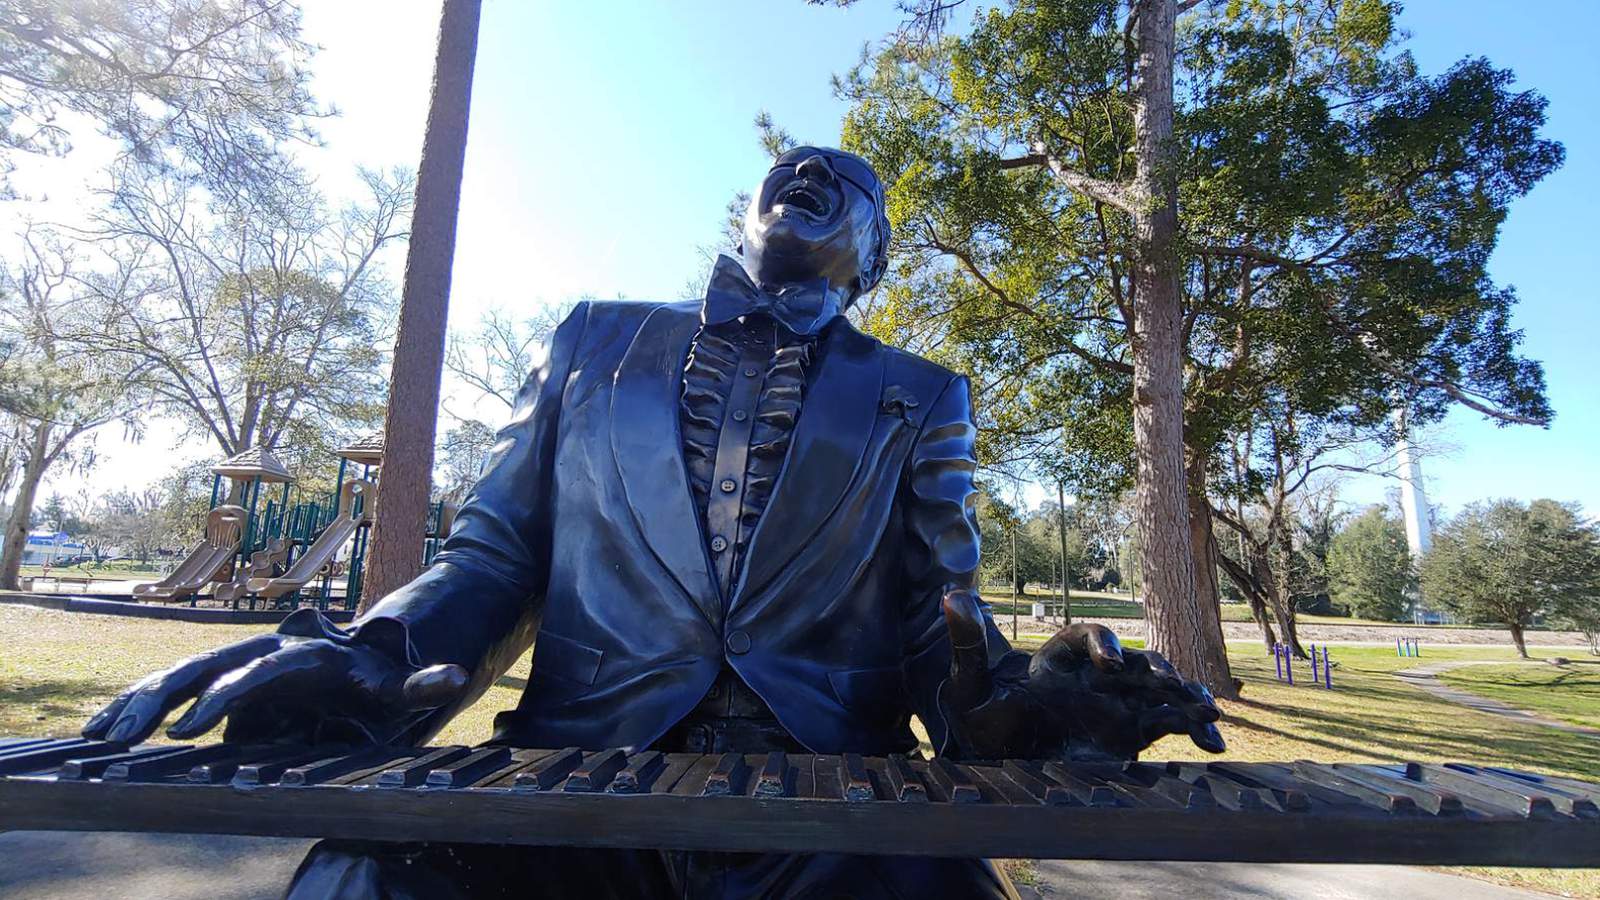 Ray Charles’ musical legacy has roots in Jacksonville area